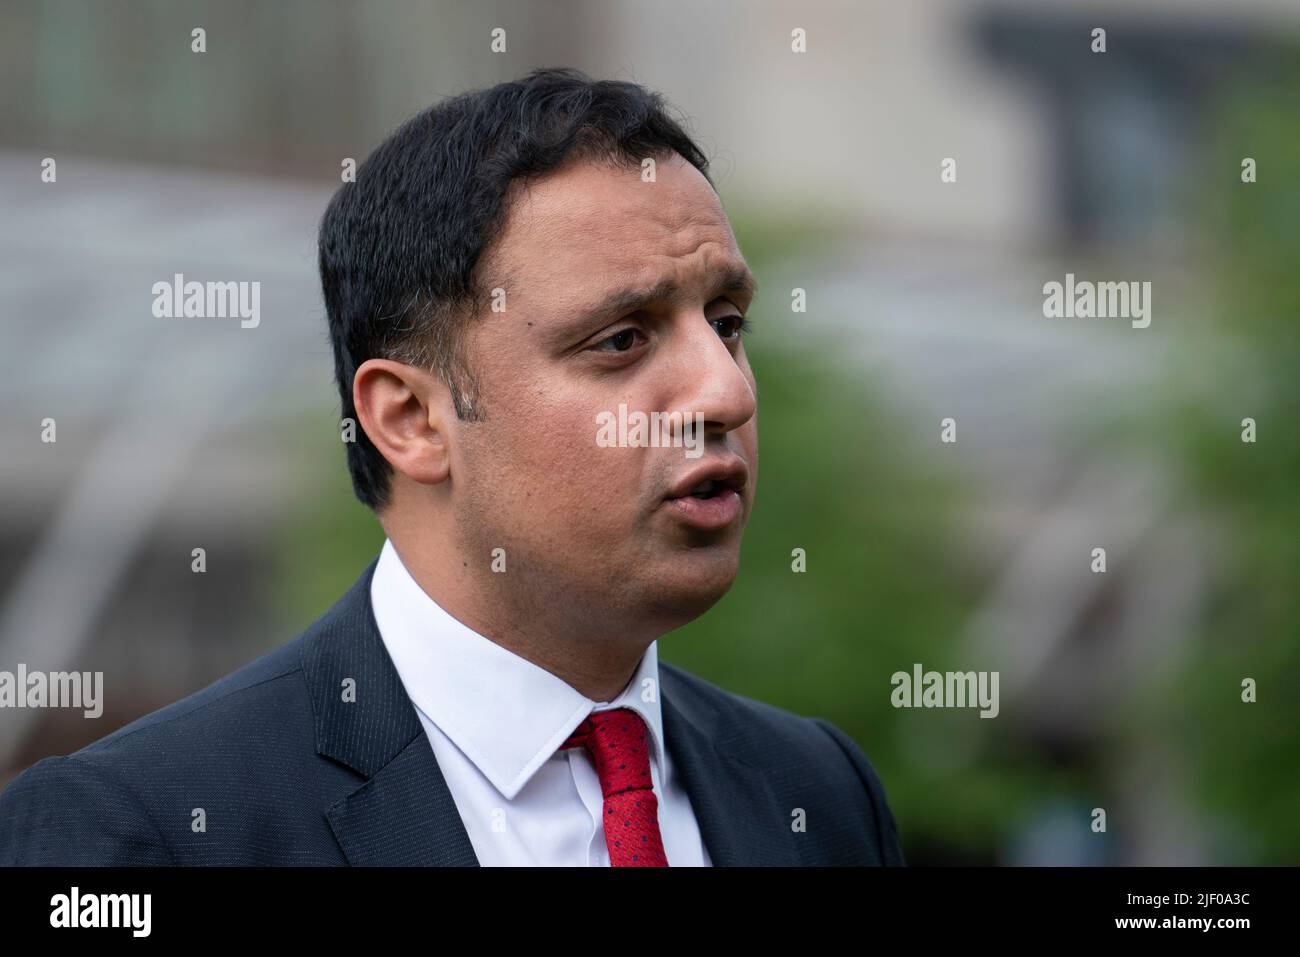 Edinburgh, Scotland, UK. 28 June 2022.  First Minister of Scotland Nicola Sturgeon makes statement to Scottish Parliament outlining her plans to hold another independence referendum in Scotland. Pic; Leader of the Scottish Labour Party, Anas Sarwar talks to media after statement by Nicola Sturgeon. Iain Masterton/Alamy Live News Stock Photo